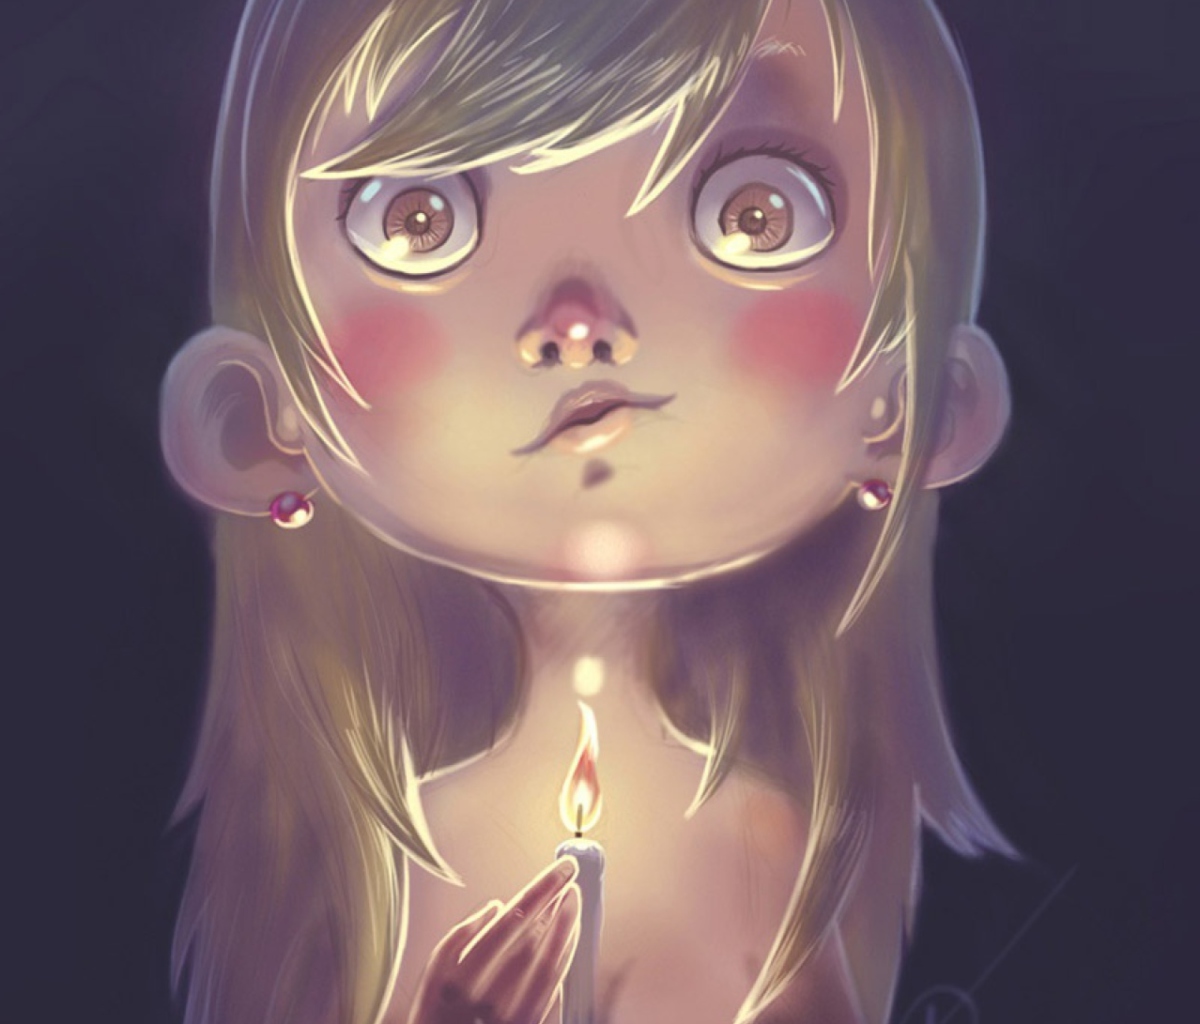 Das Girl With Candle Wallpaper 1200x1024